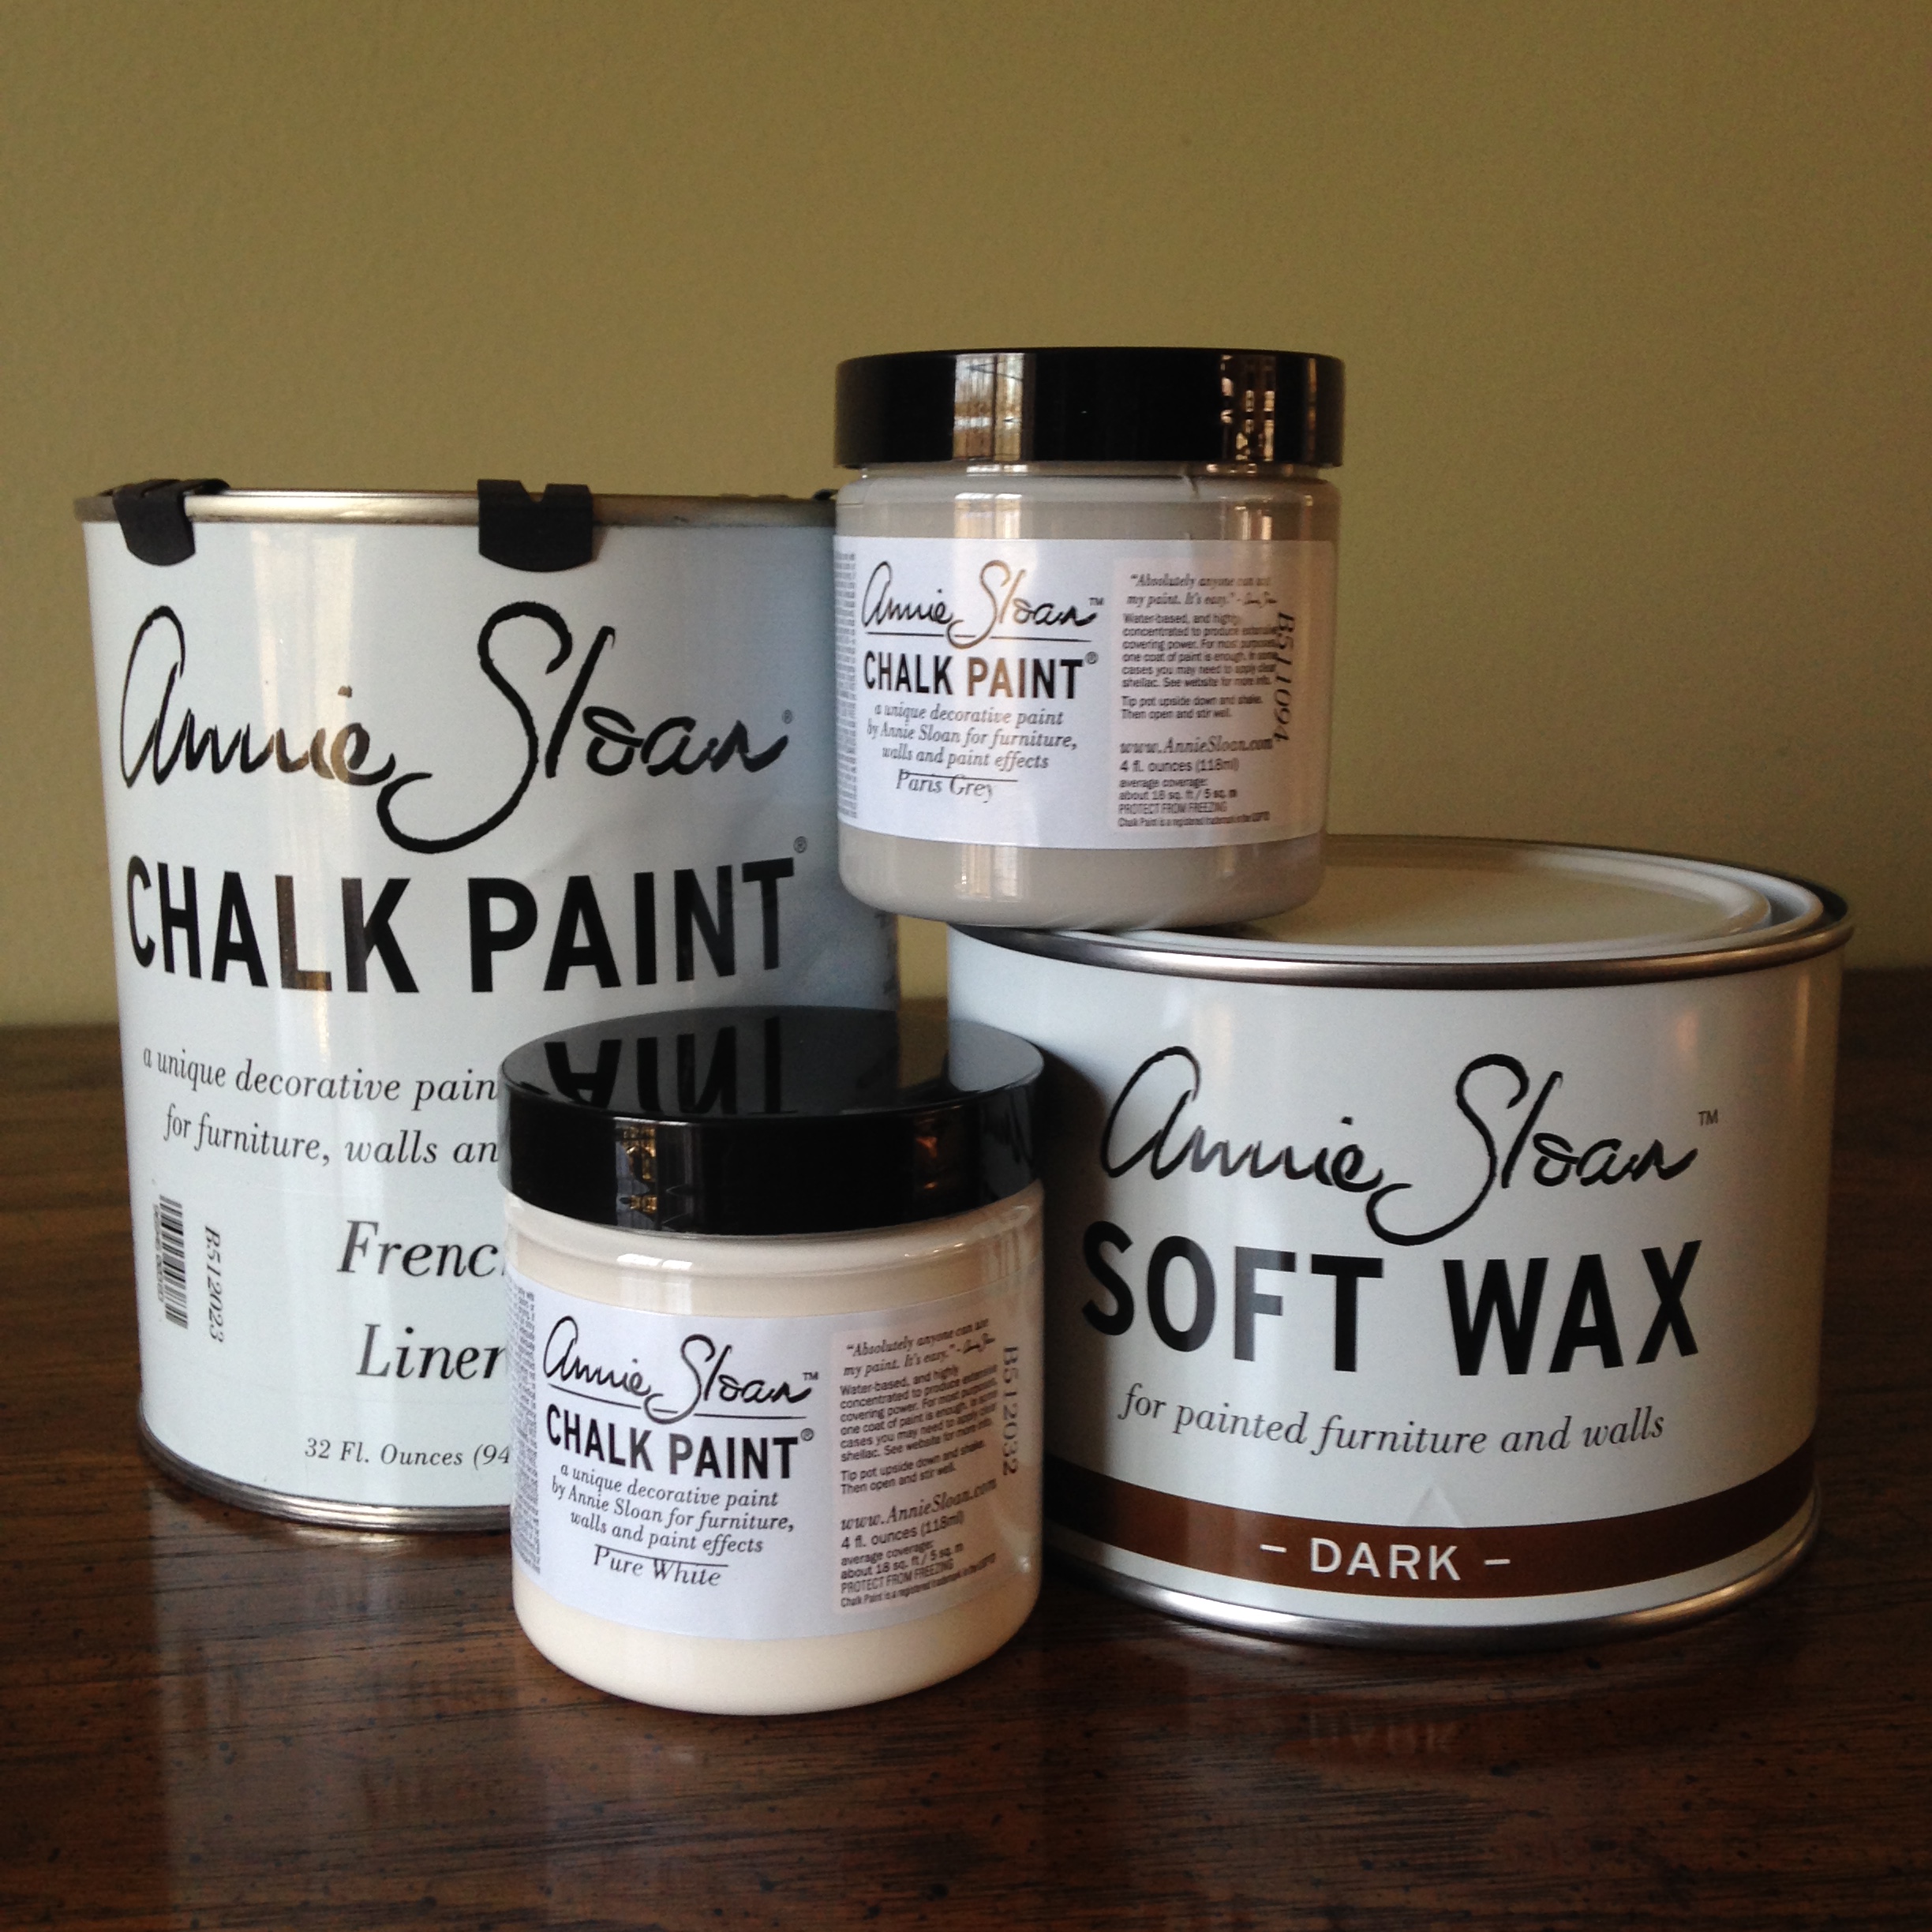 Does Chalk Paint Have To Be Waxed?